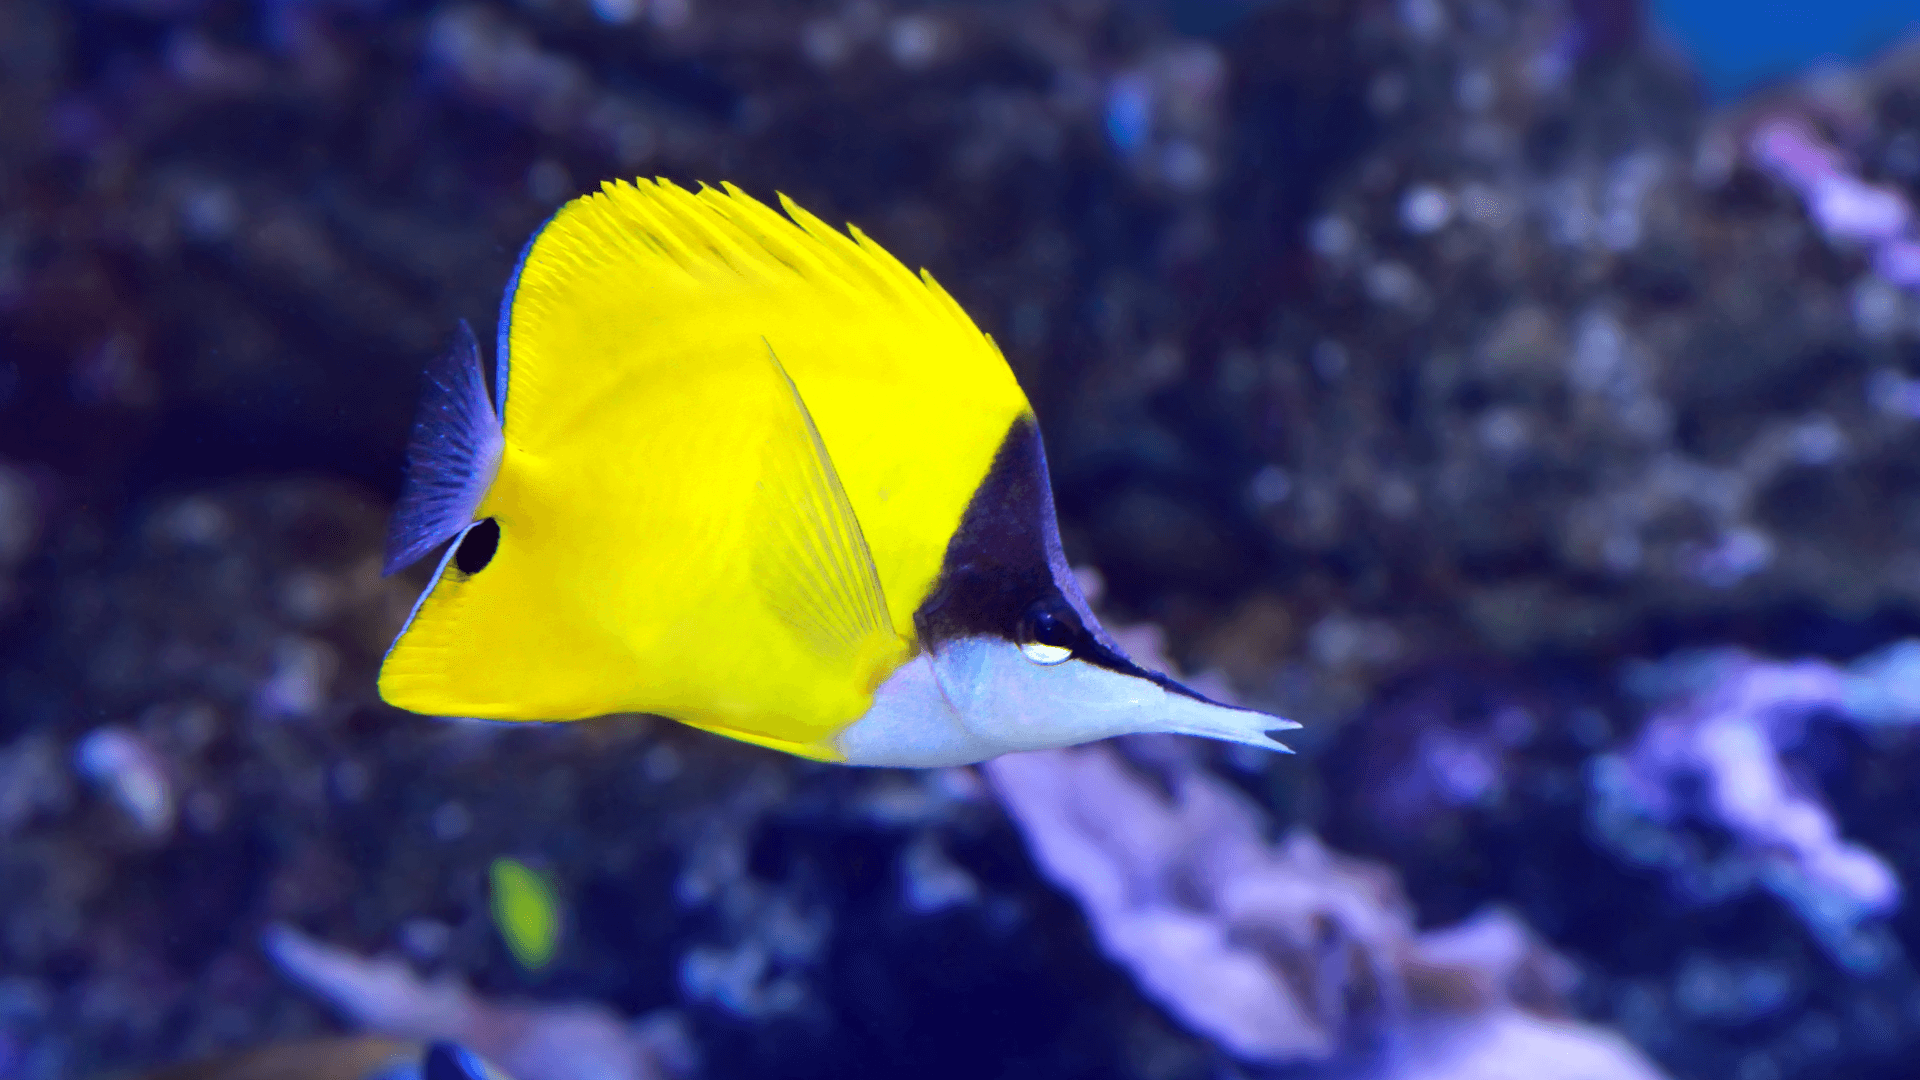 A photo of Butterflyfish